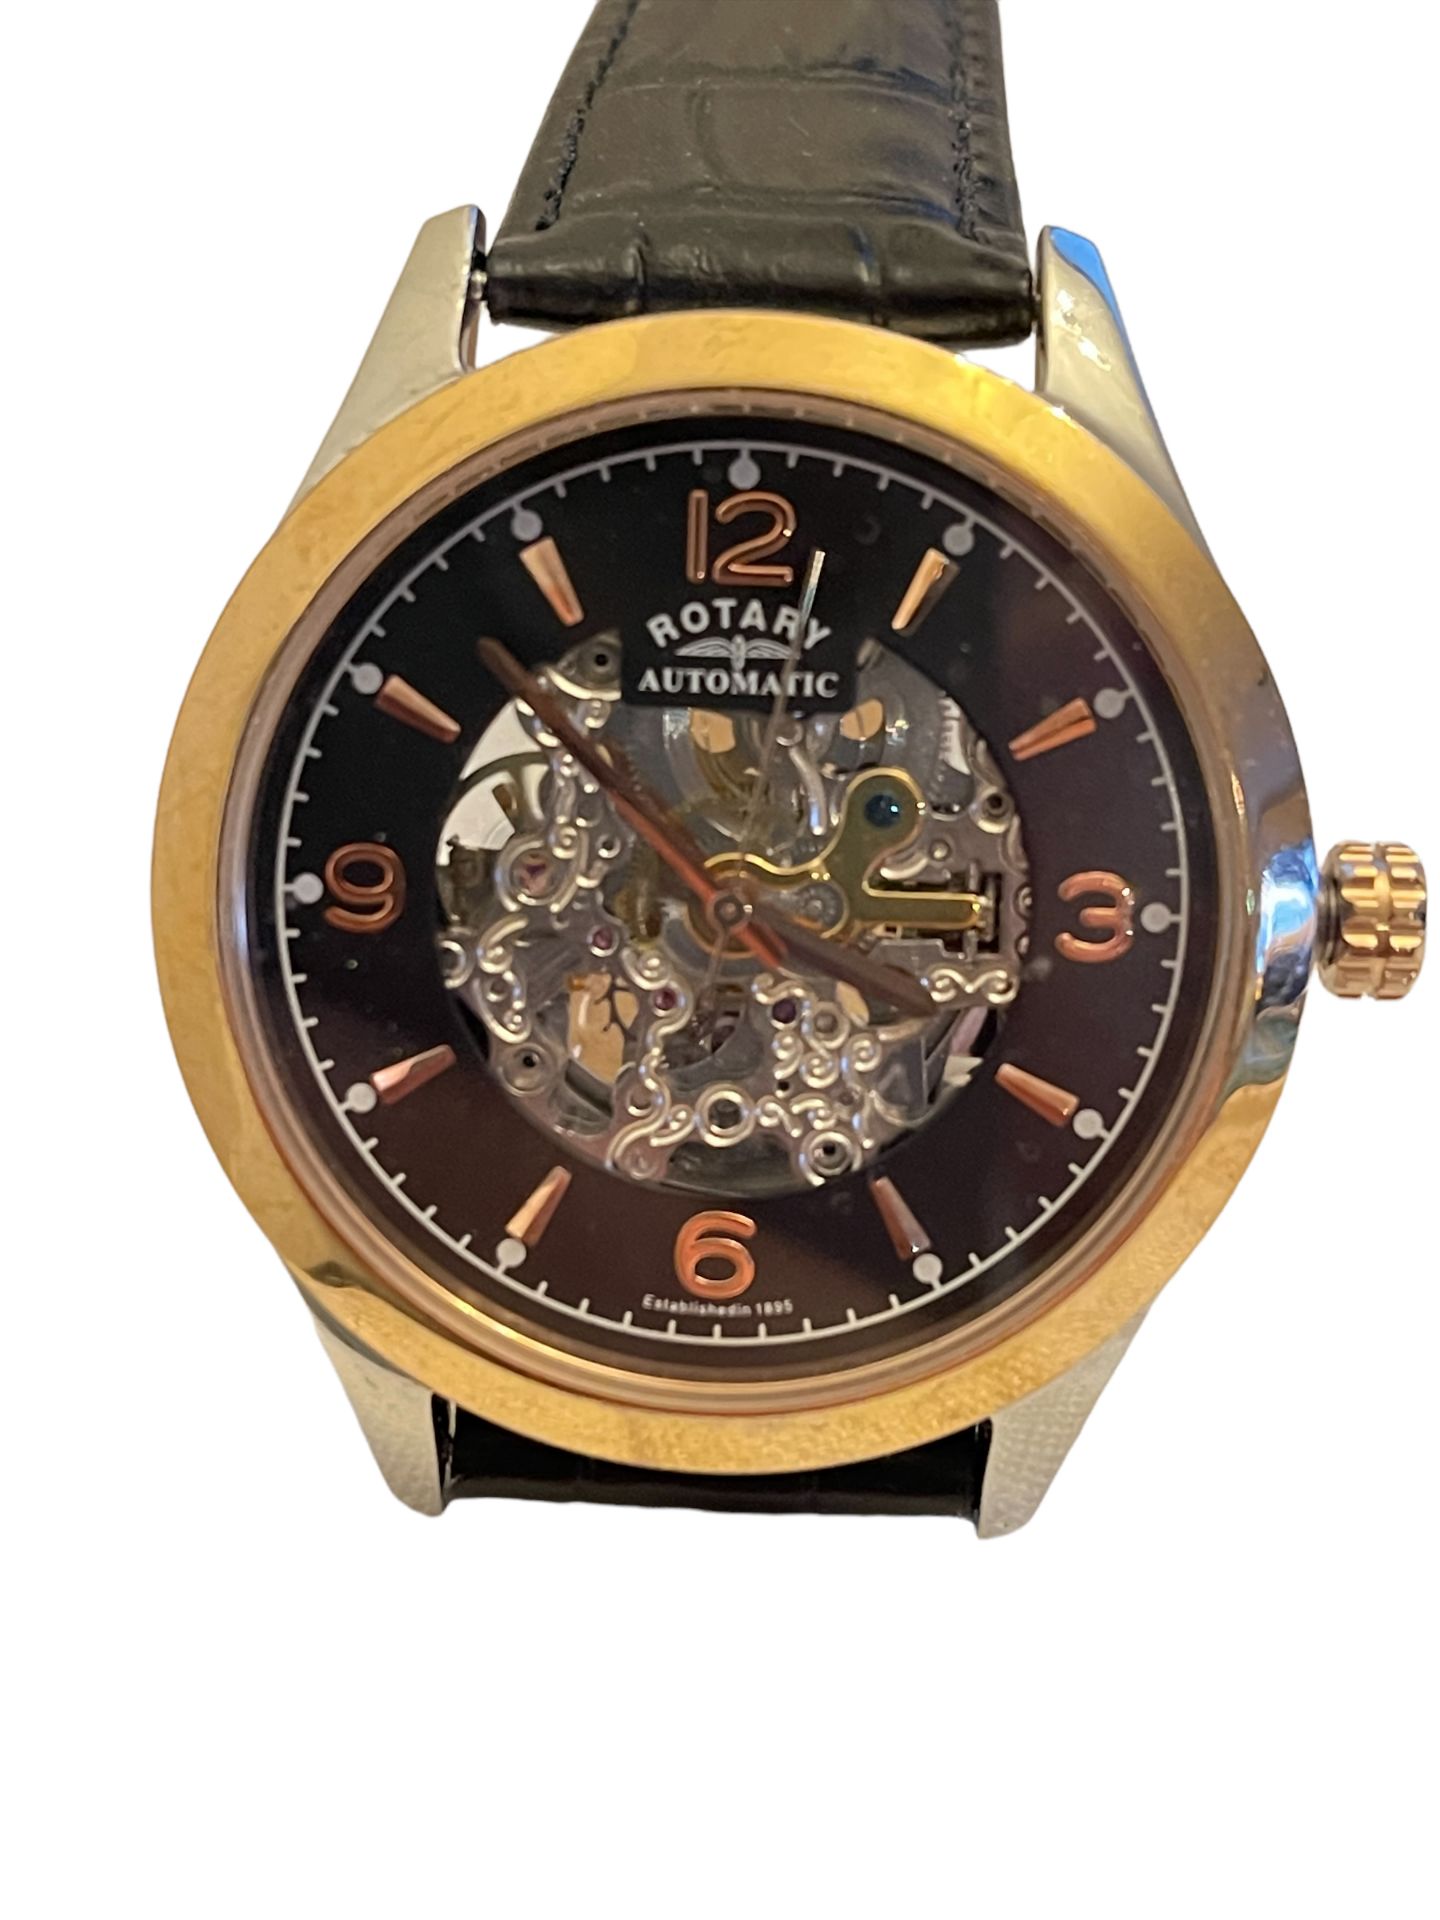 Rotary Skeleton Automatic Mens Watch - Ex Demo or Return Stock from our Private Jet Charter - Image 3 of 4